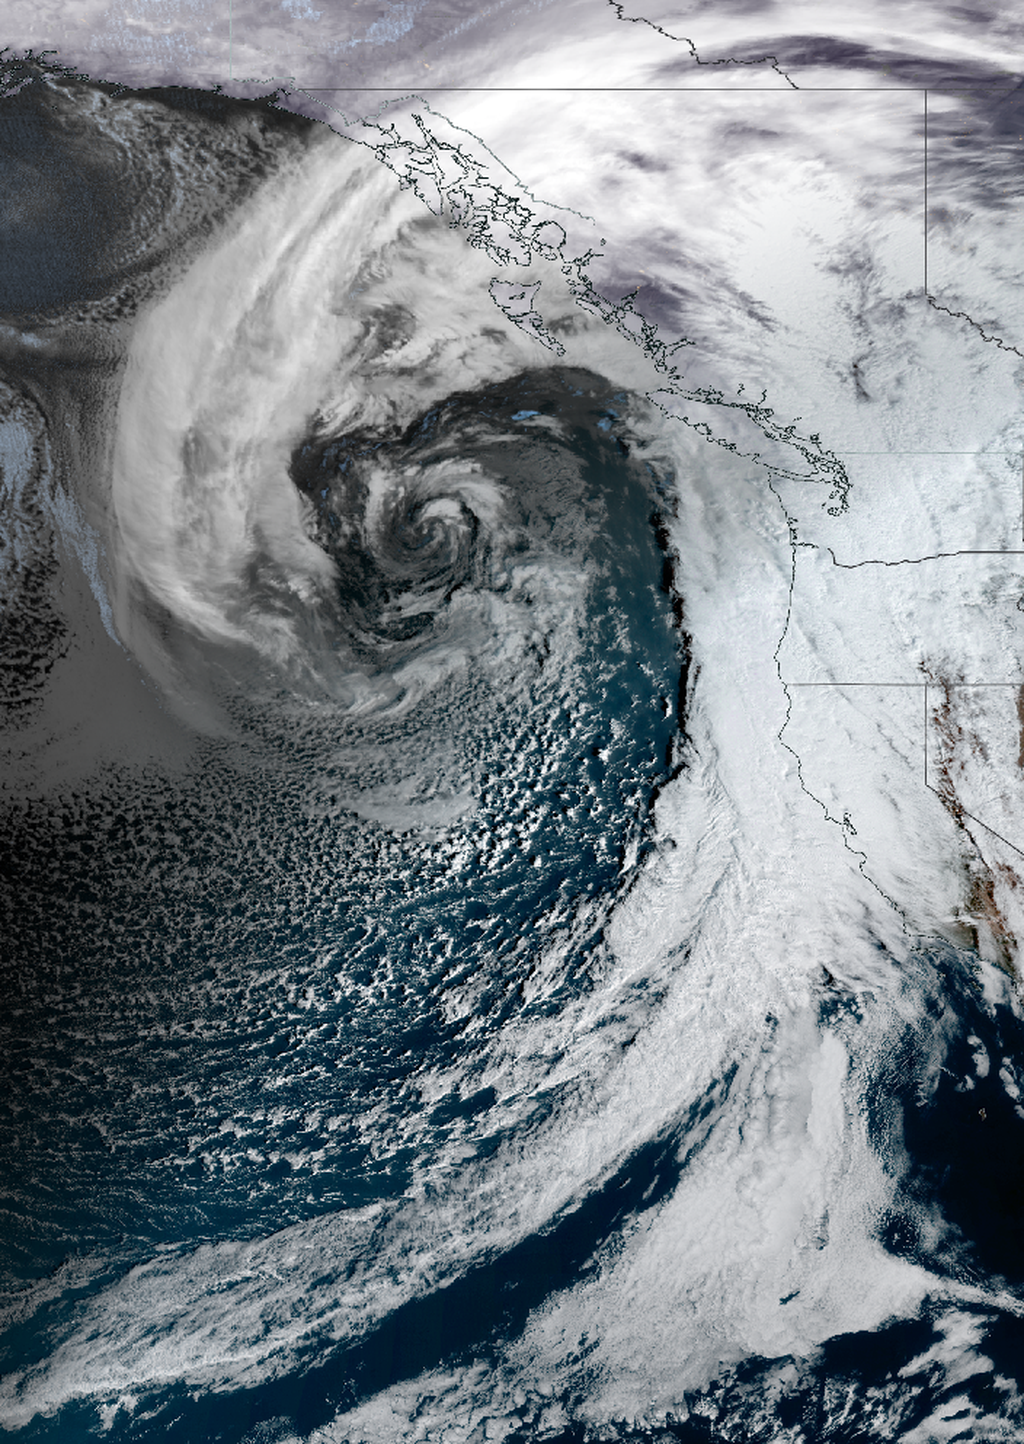 A powerful winter storm hit the west coast of the U.S. and Canada on Jan. 31, 2024. Weather forecasters expect heavy rainfall and gusty winds from coastal British Columbia to central California. Mountain areas such as the Sierra Nevada are likely to get significant snowfall. The NOAA-NASA GOES-West satellite captured this image on the morning of Jan. 31.